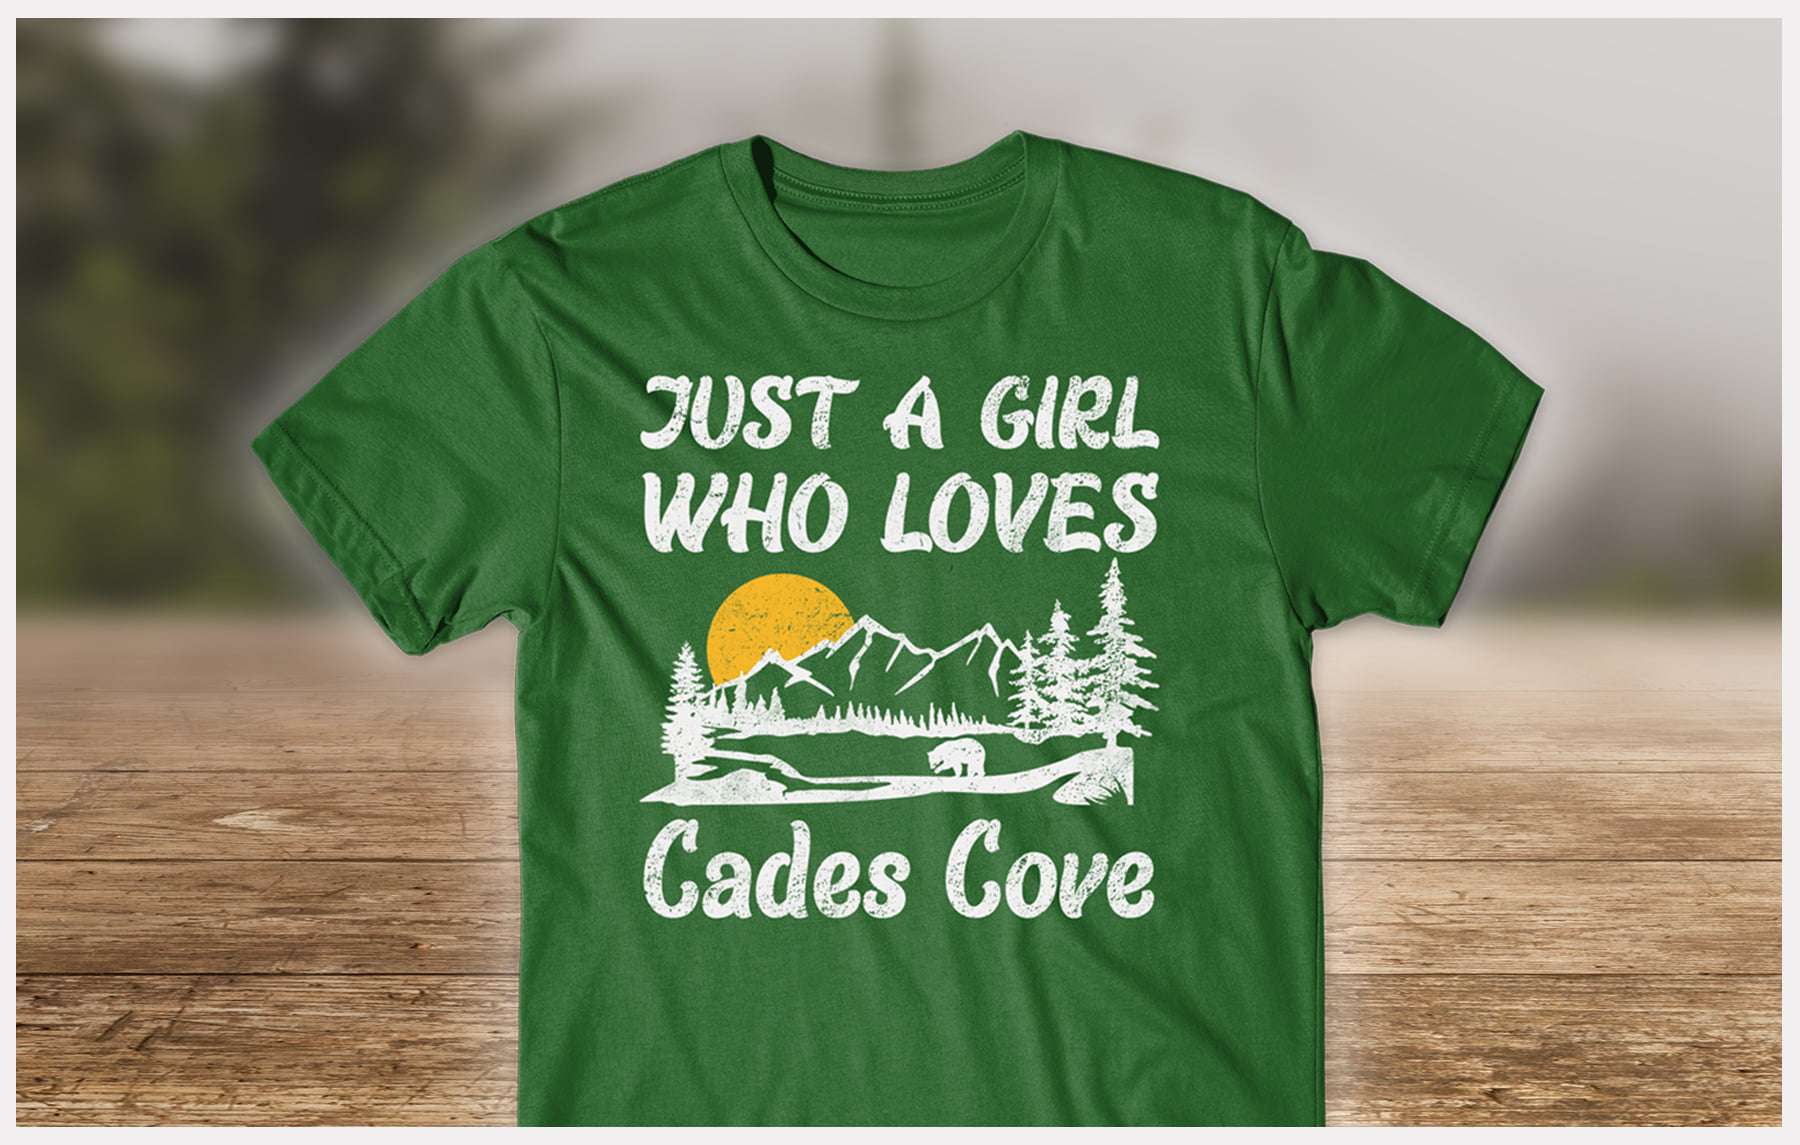 Cades Cove - Just a girl who loves cades cove